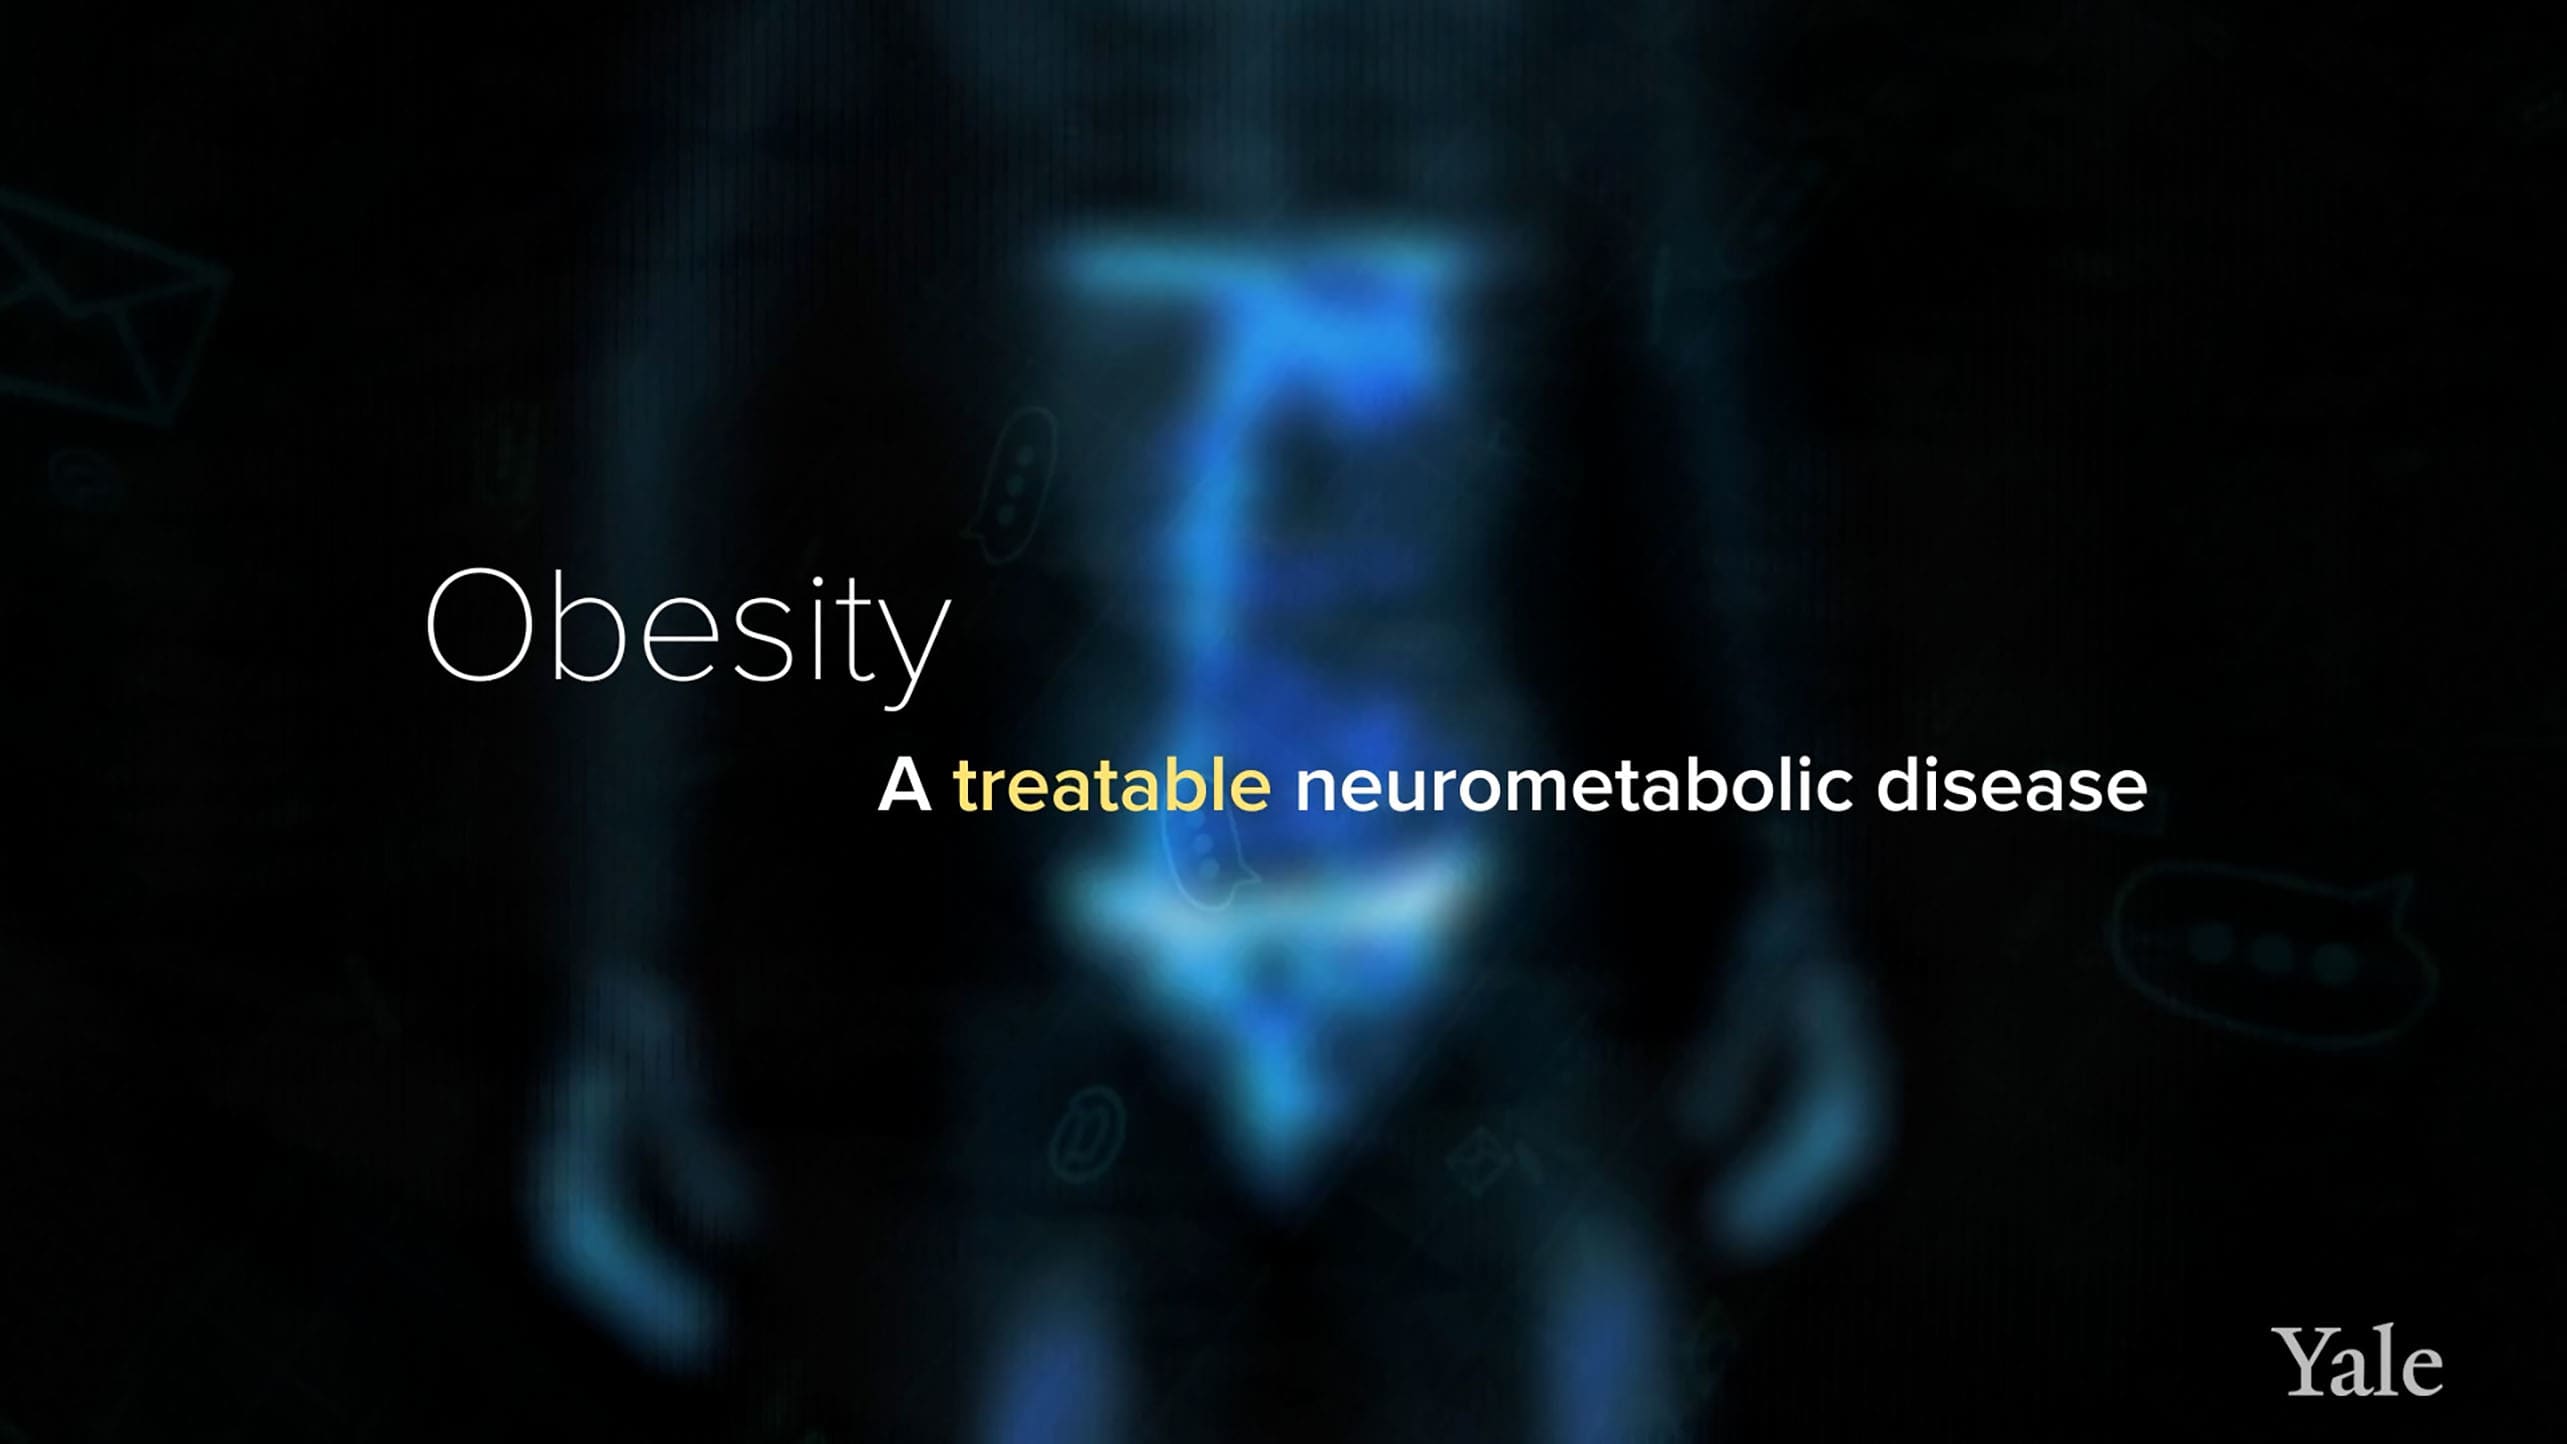 Title reads "Obesity - a treatable neurometabolic disease" 